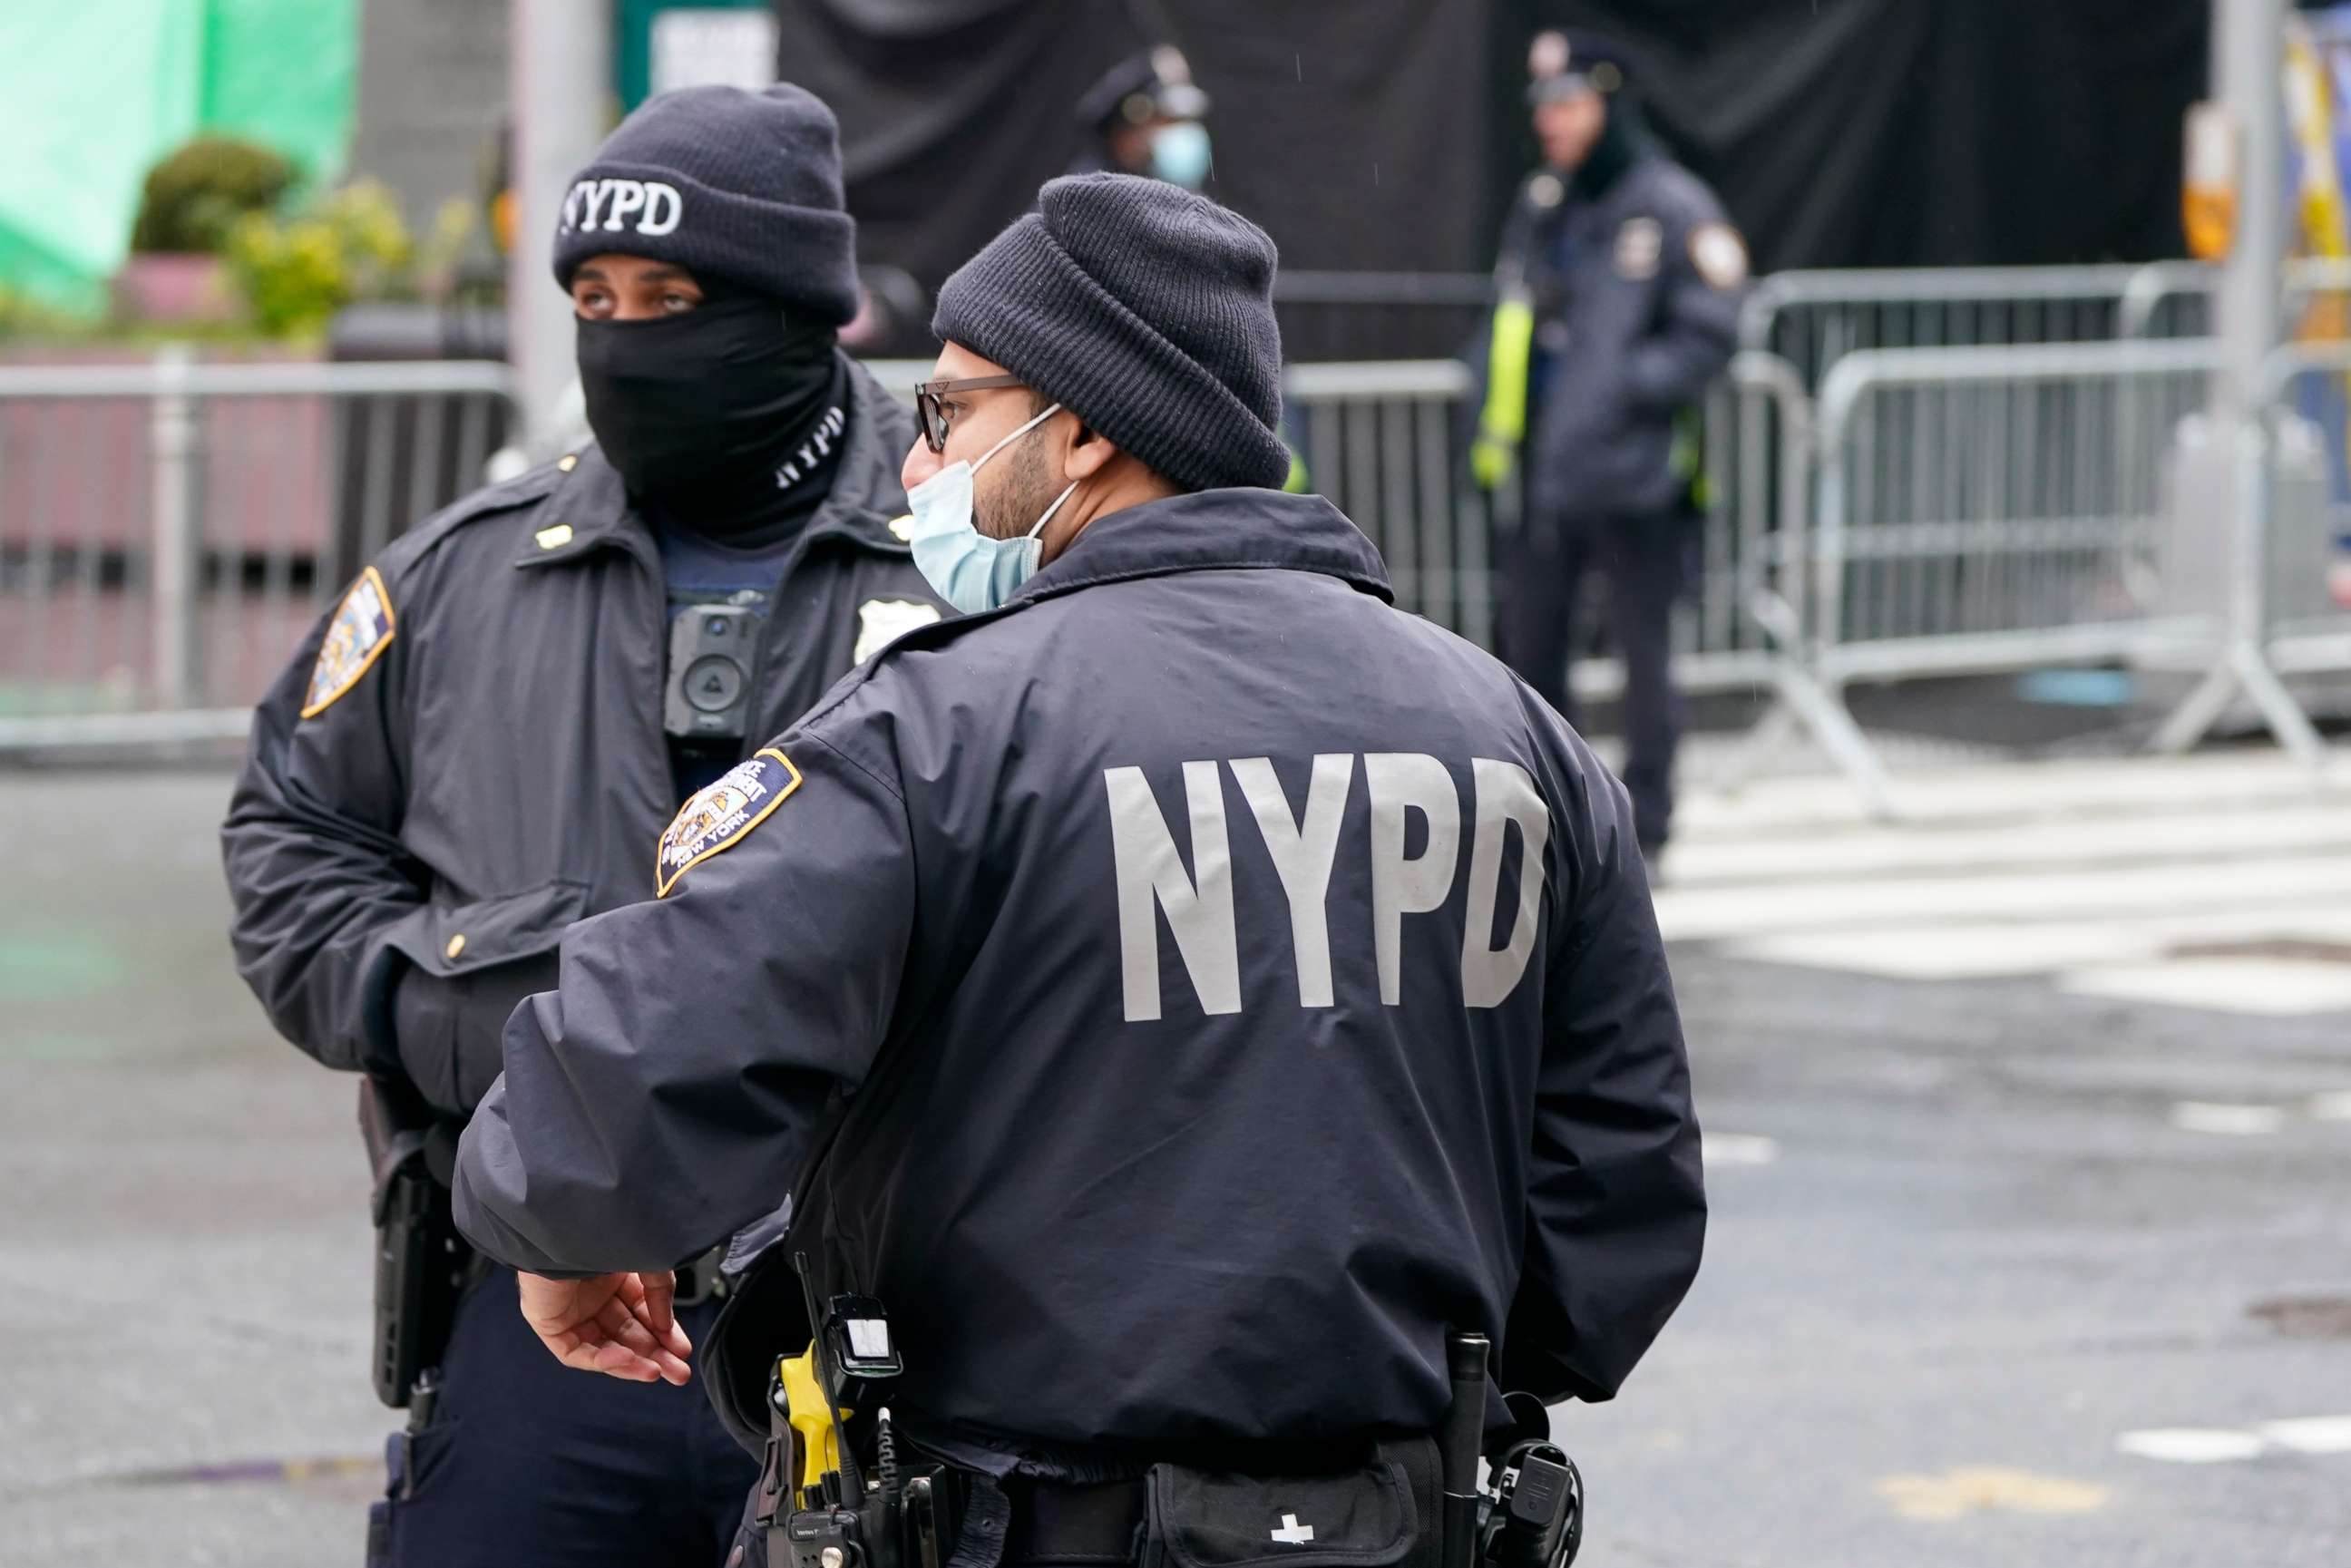 PHOTO: New York Police officers wear protective masks during the coronavirus pandemic in Times Square, Dec. 31, 2020, in New York.